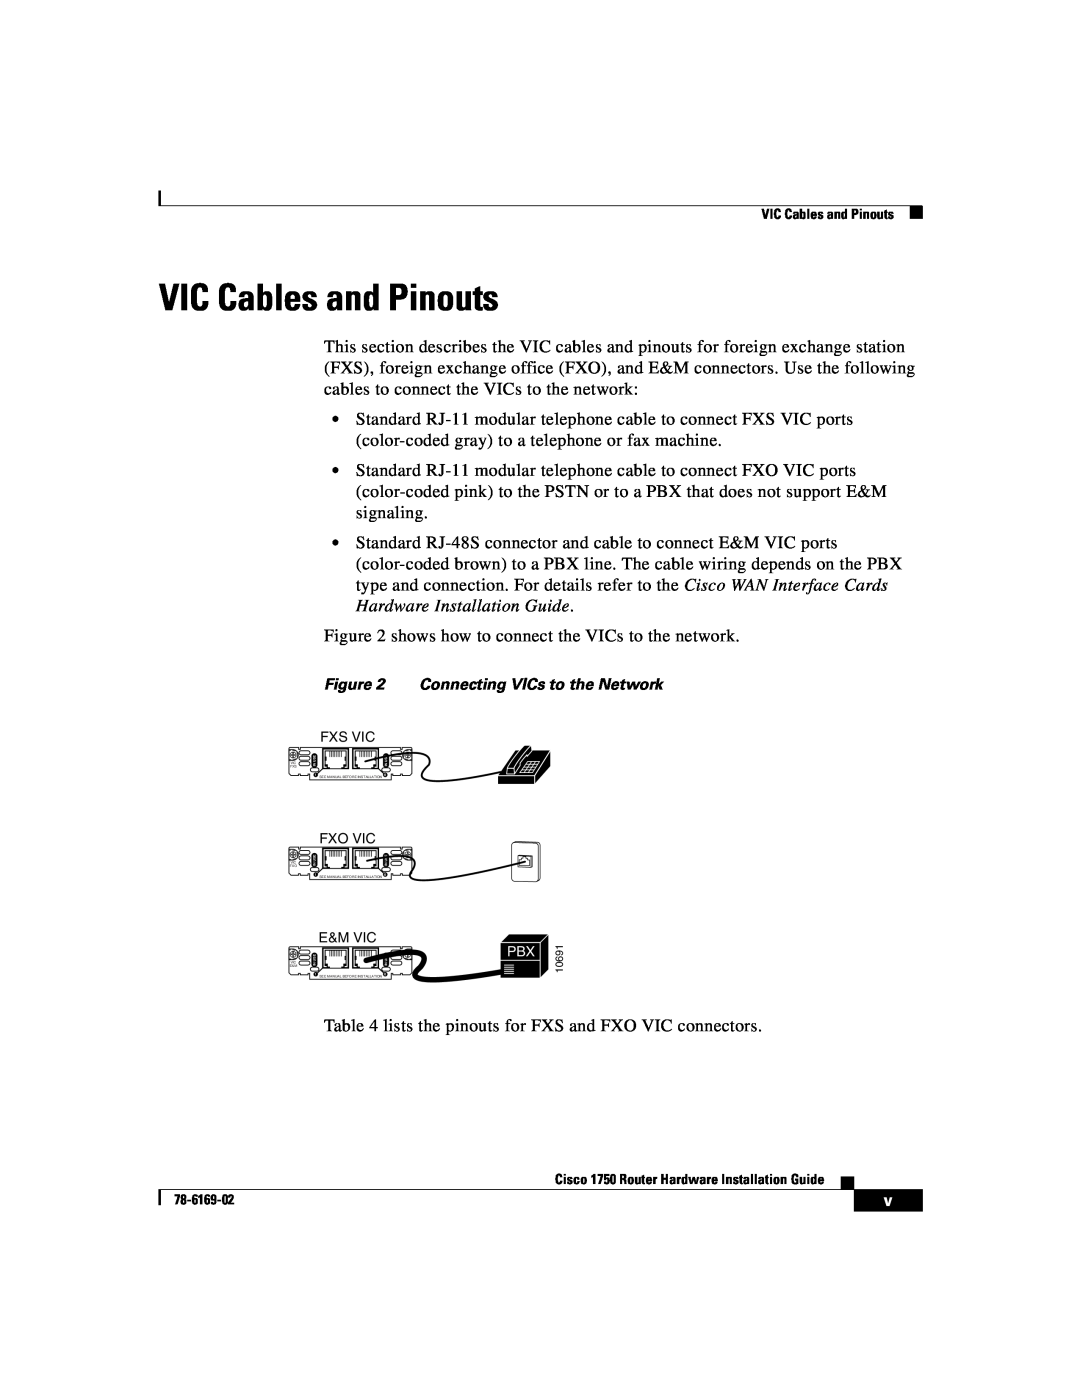 Cisco Systems CISCO1750 manual VIC Cables and Pinouts 